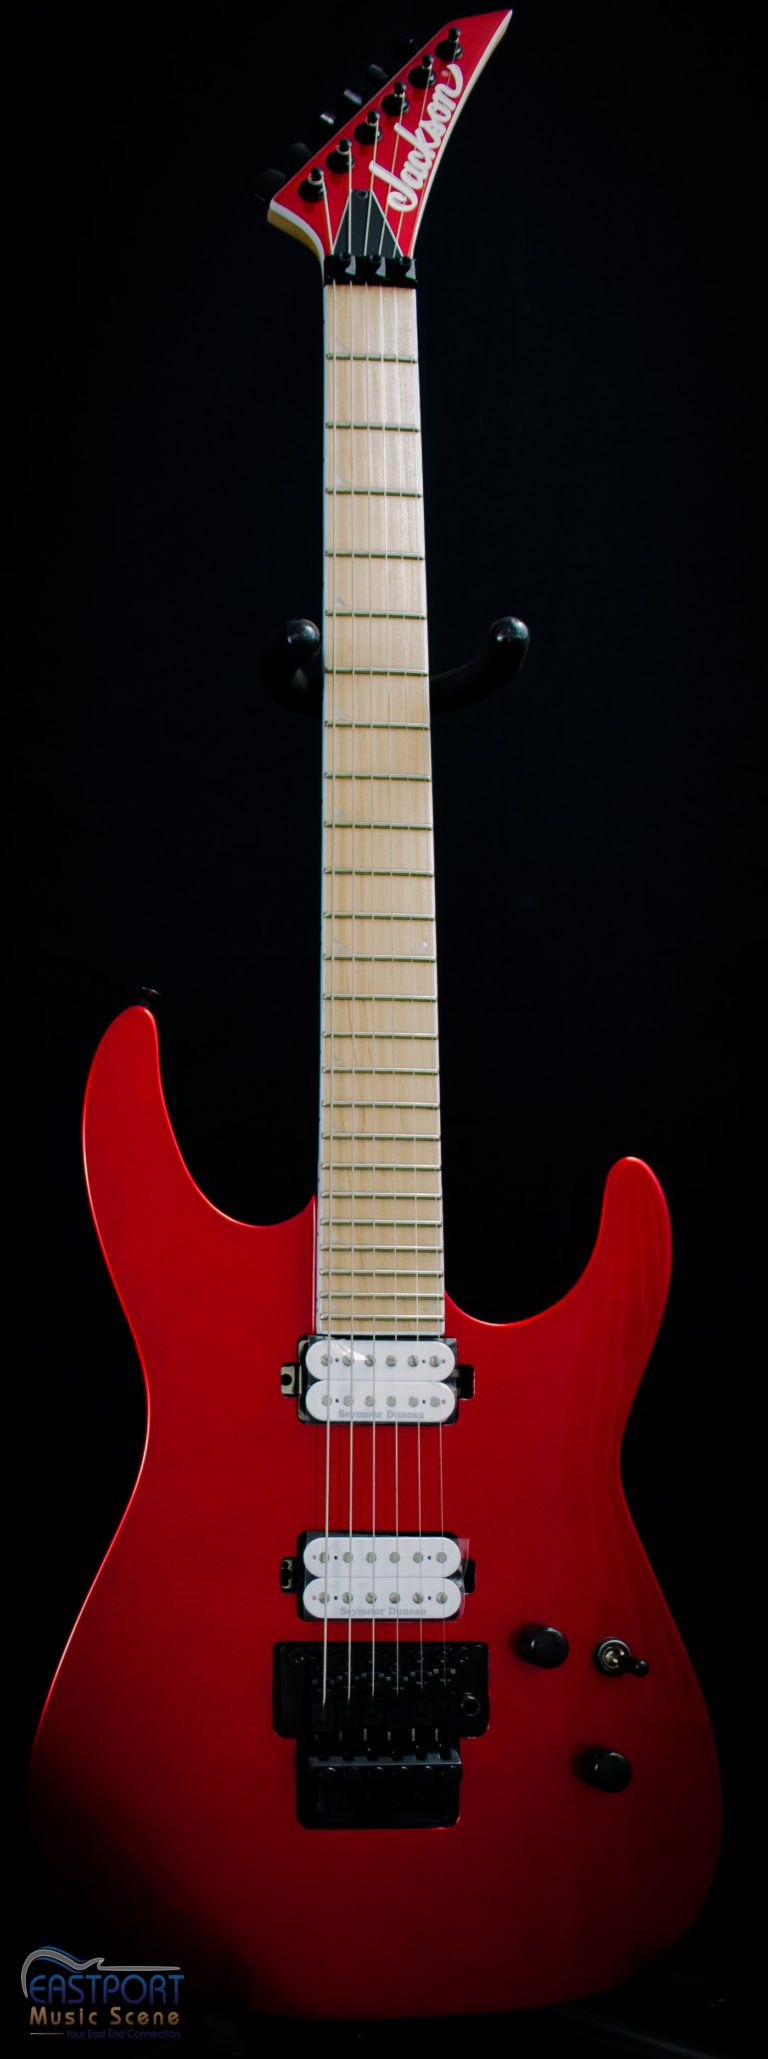 A red electric guitar with white strings and black back.